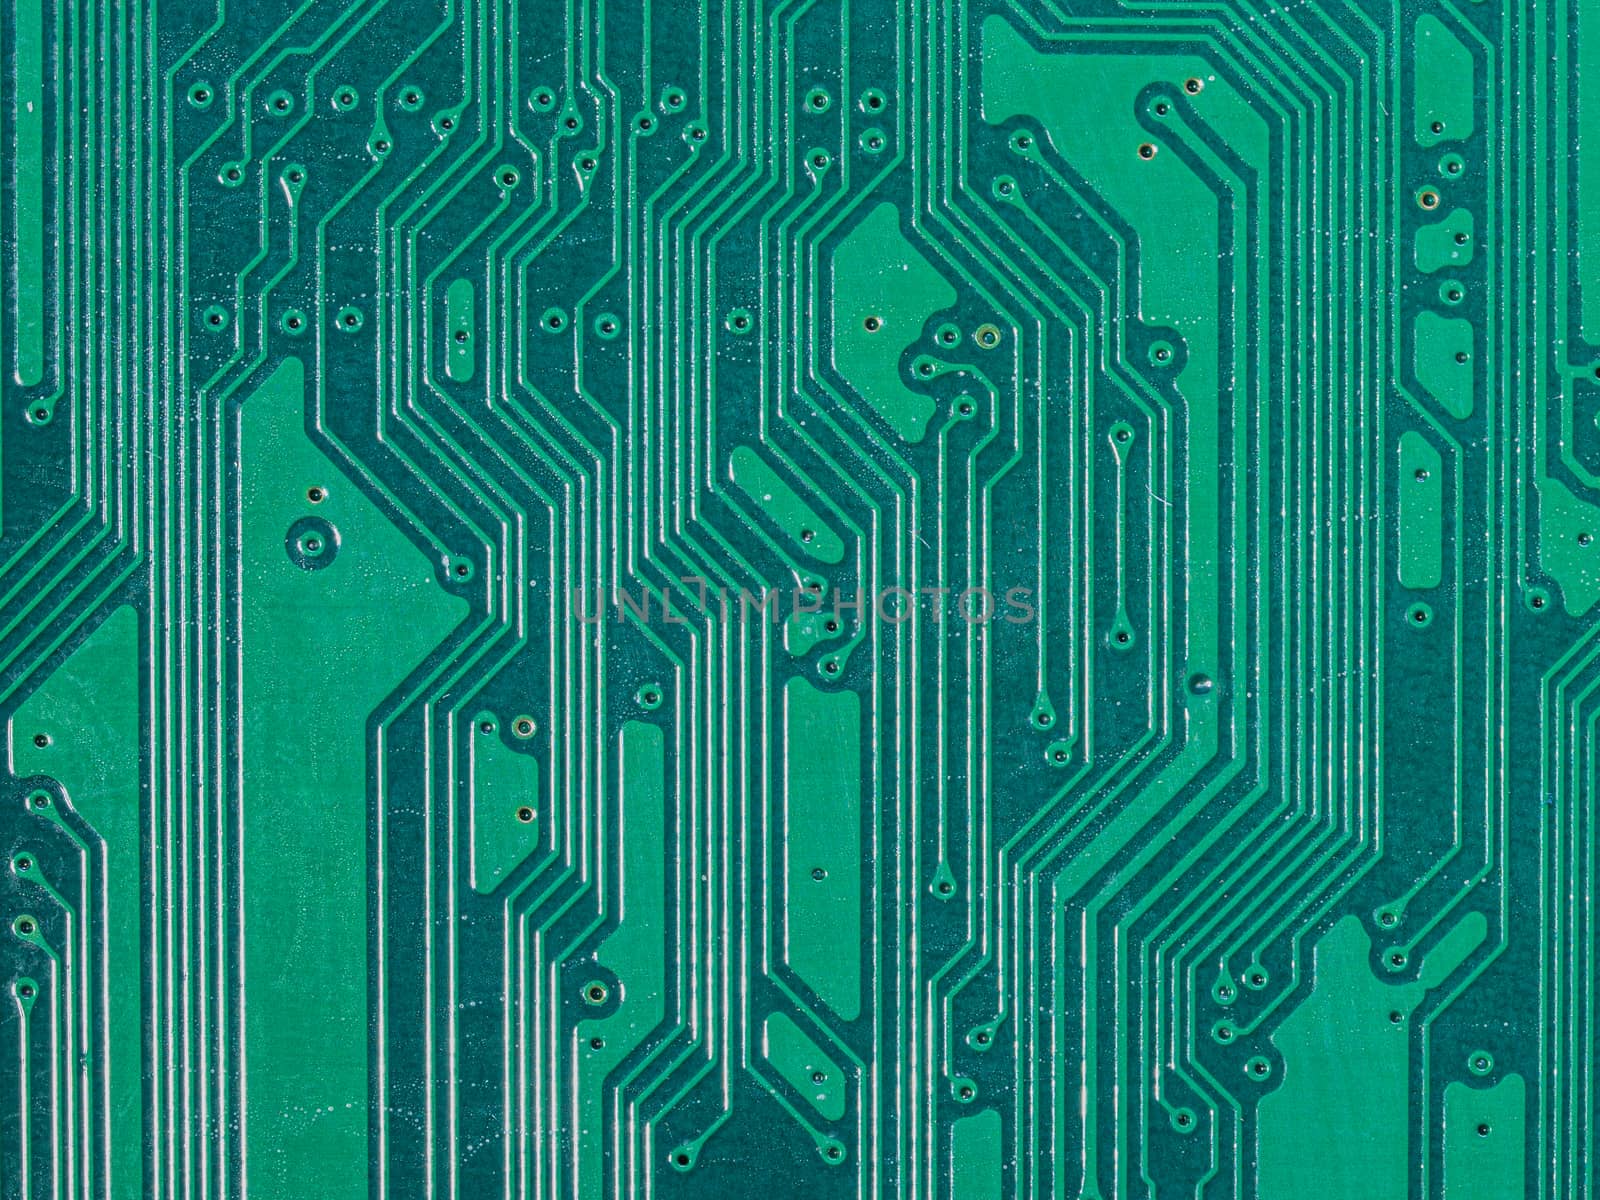 printed circuit for electronic components